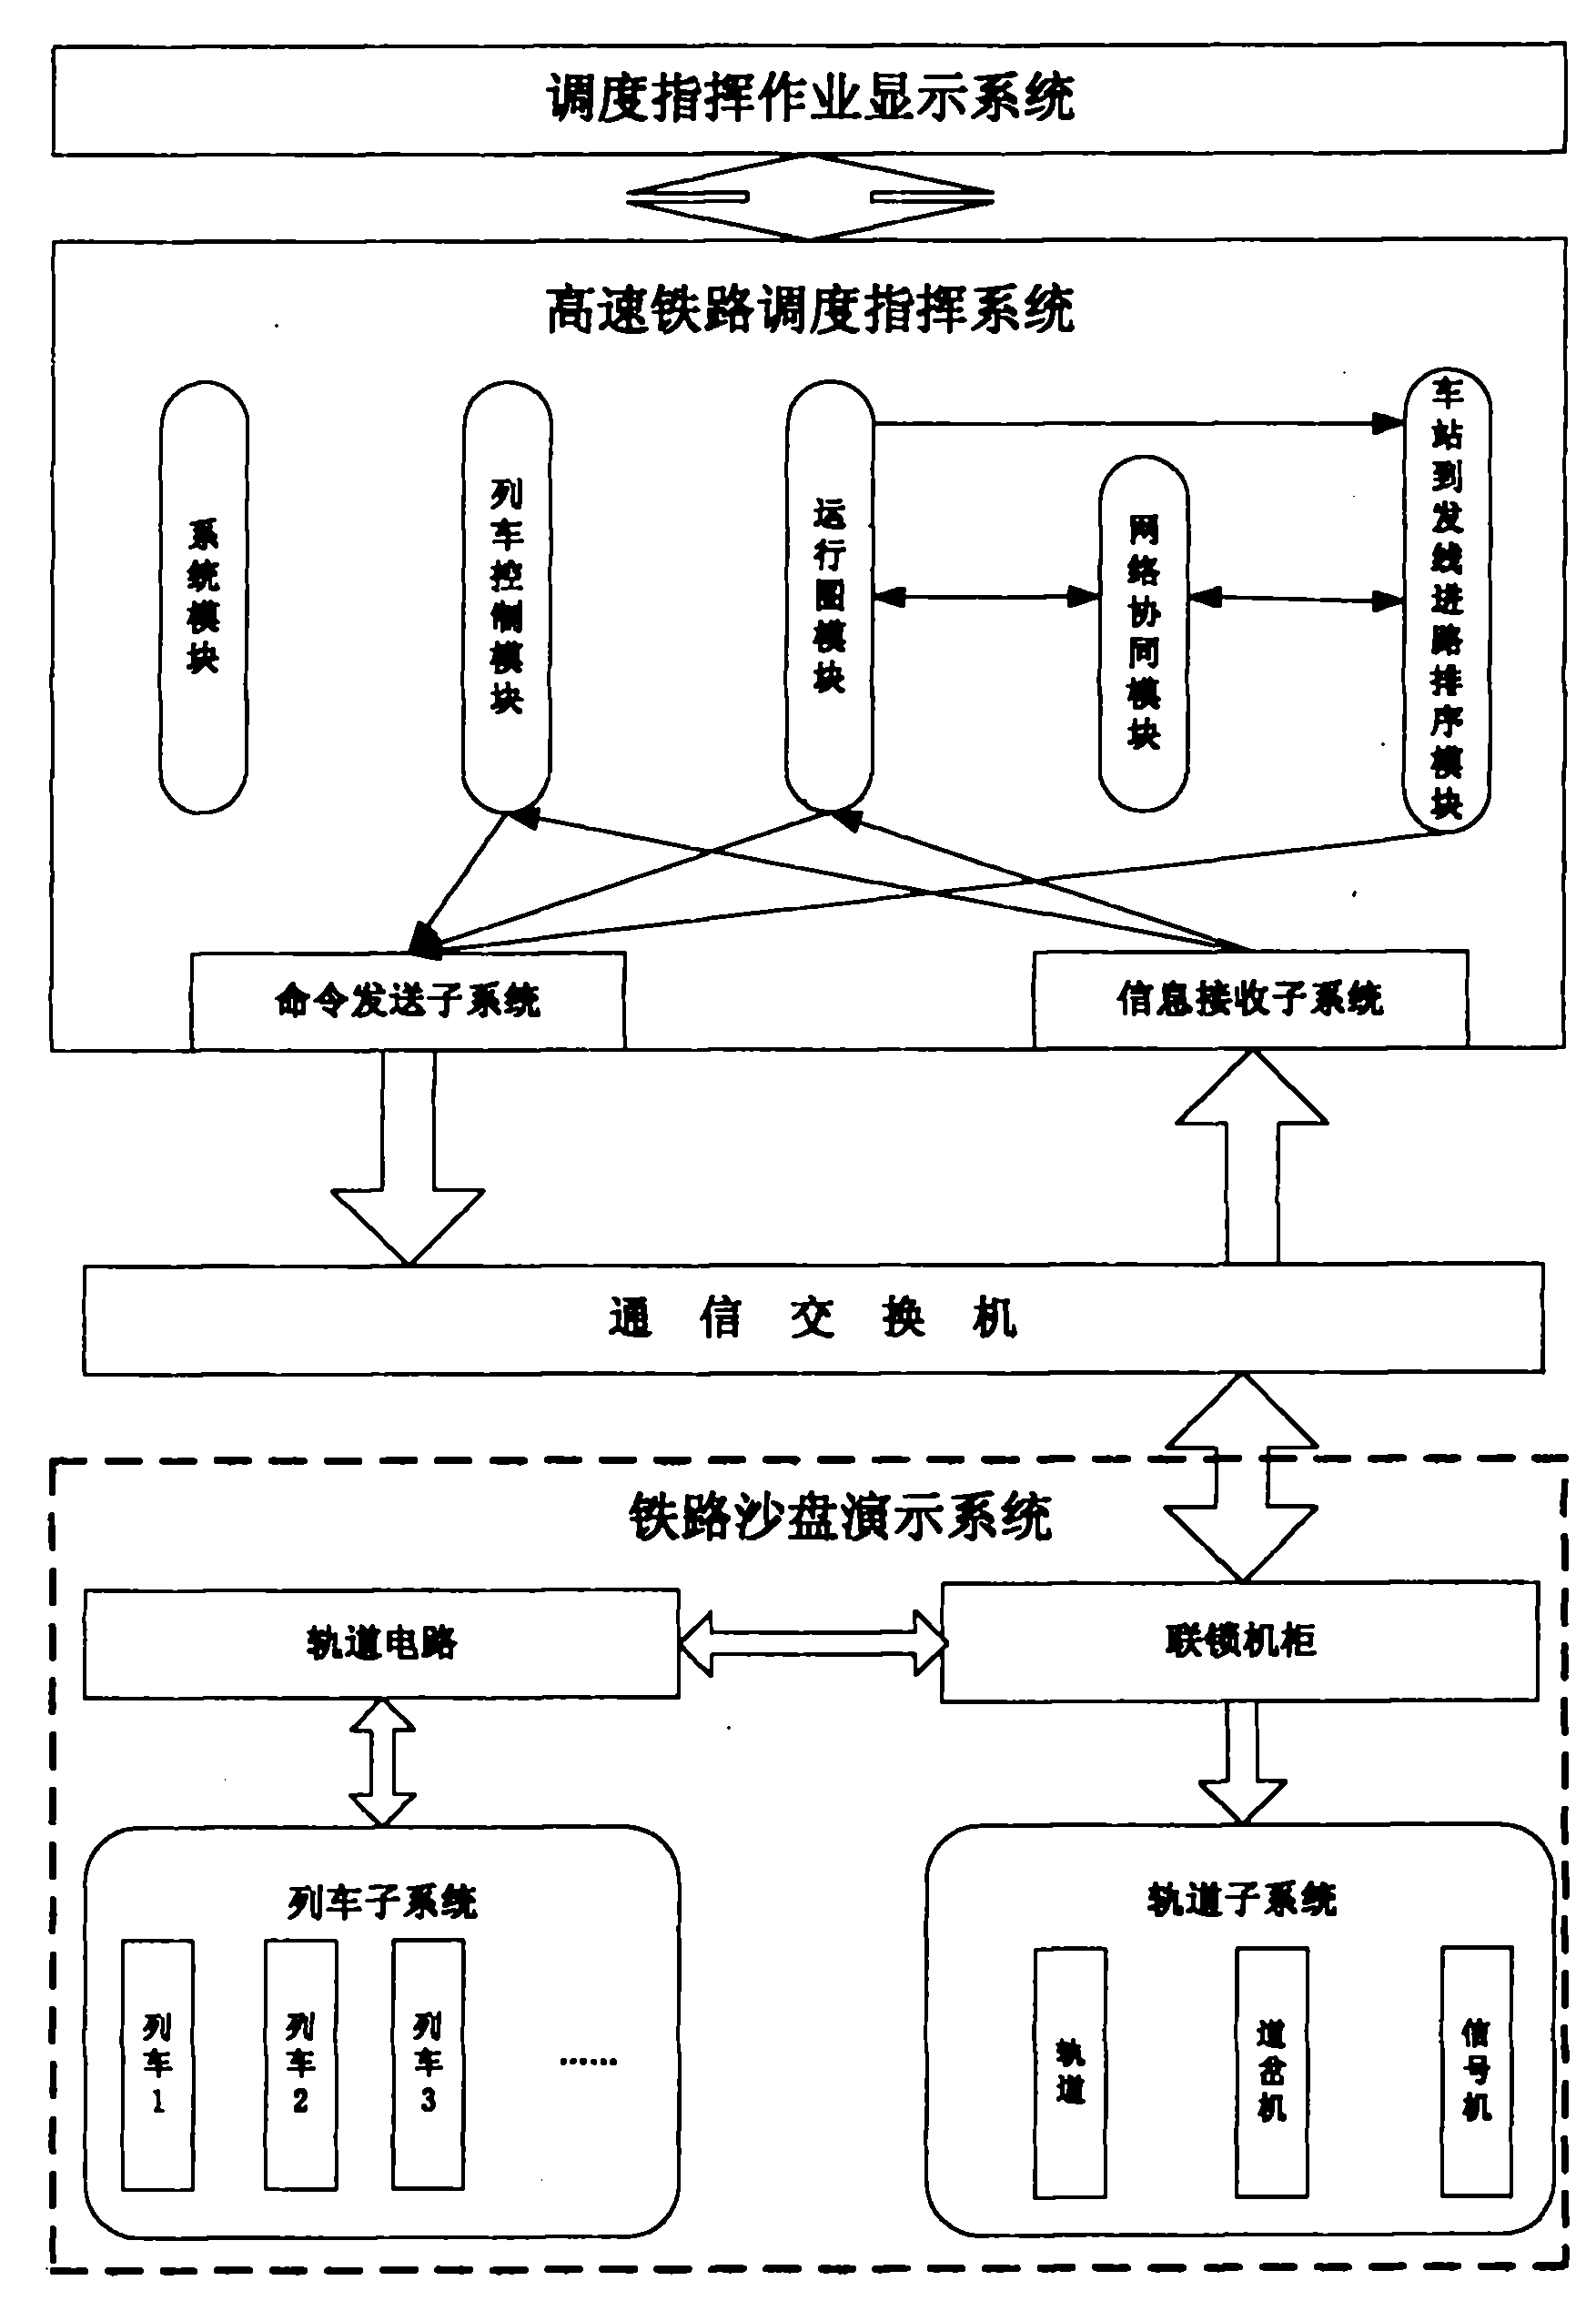 High-speed railway traffic dispatching command and train running control network cooperation system